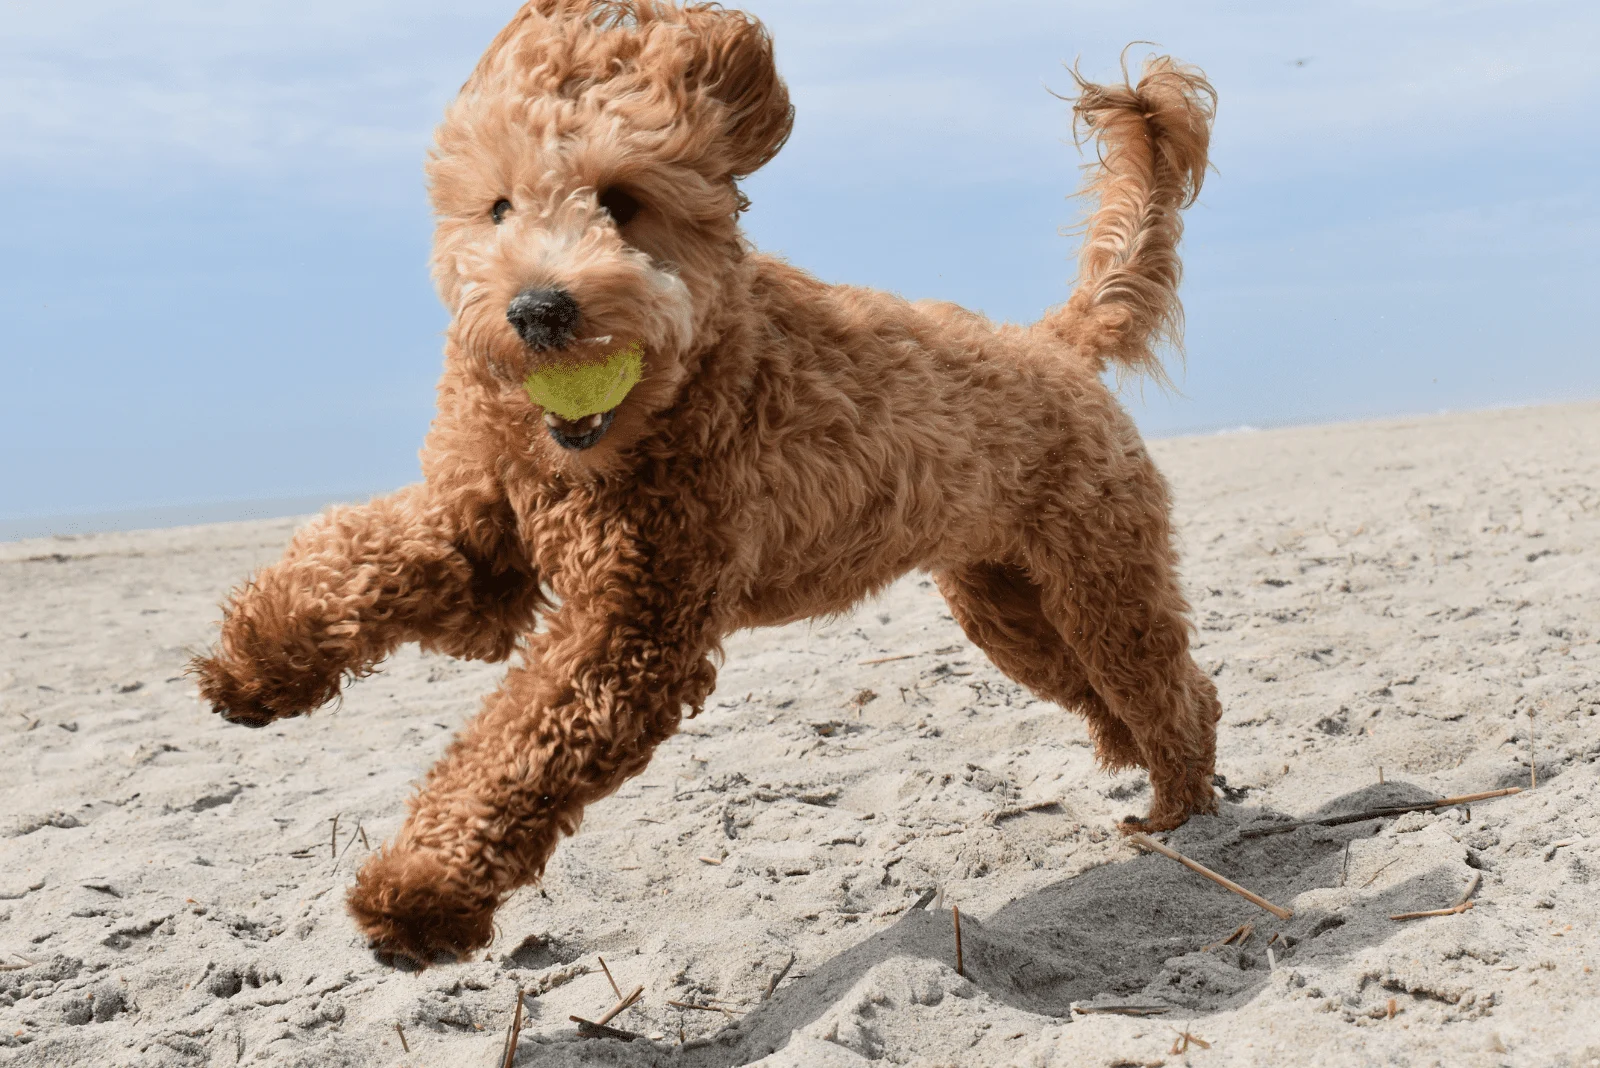 Goldendoodle runs with a ball in its mouth